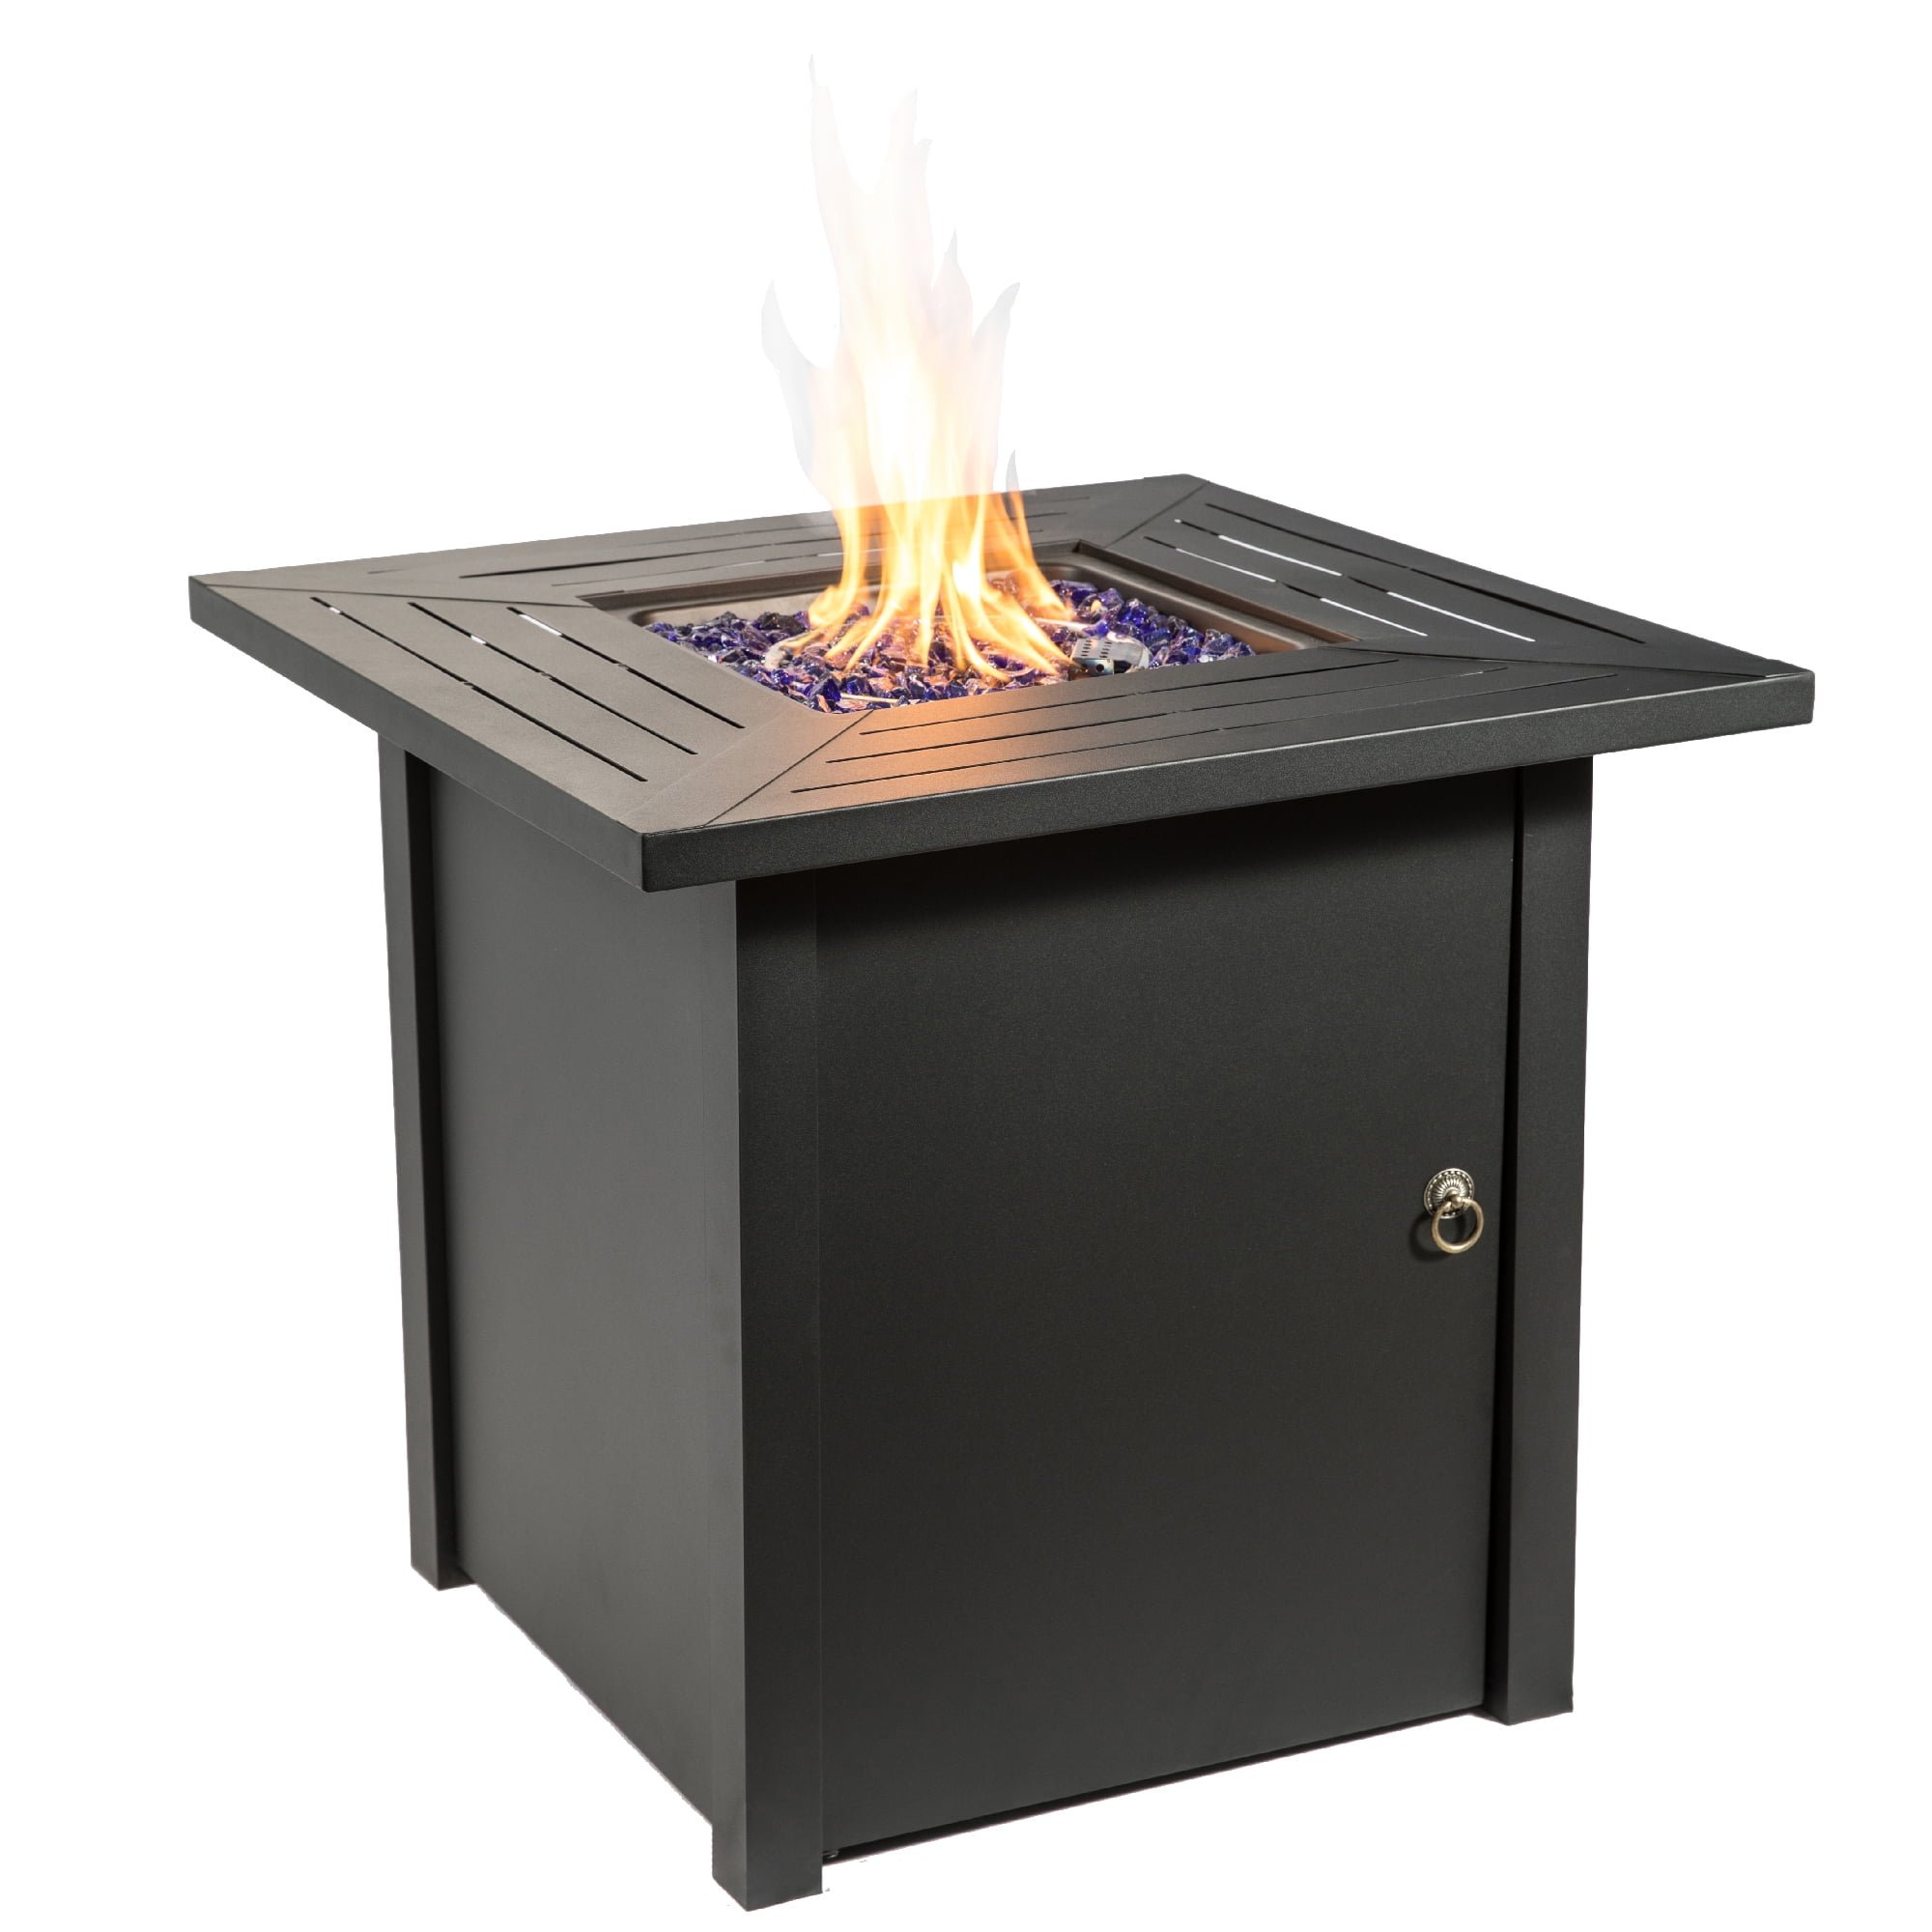 Peaktop Outdoor Square 30 Gas Fire Pit With Steel Base Walmart Com